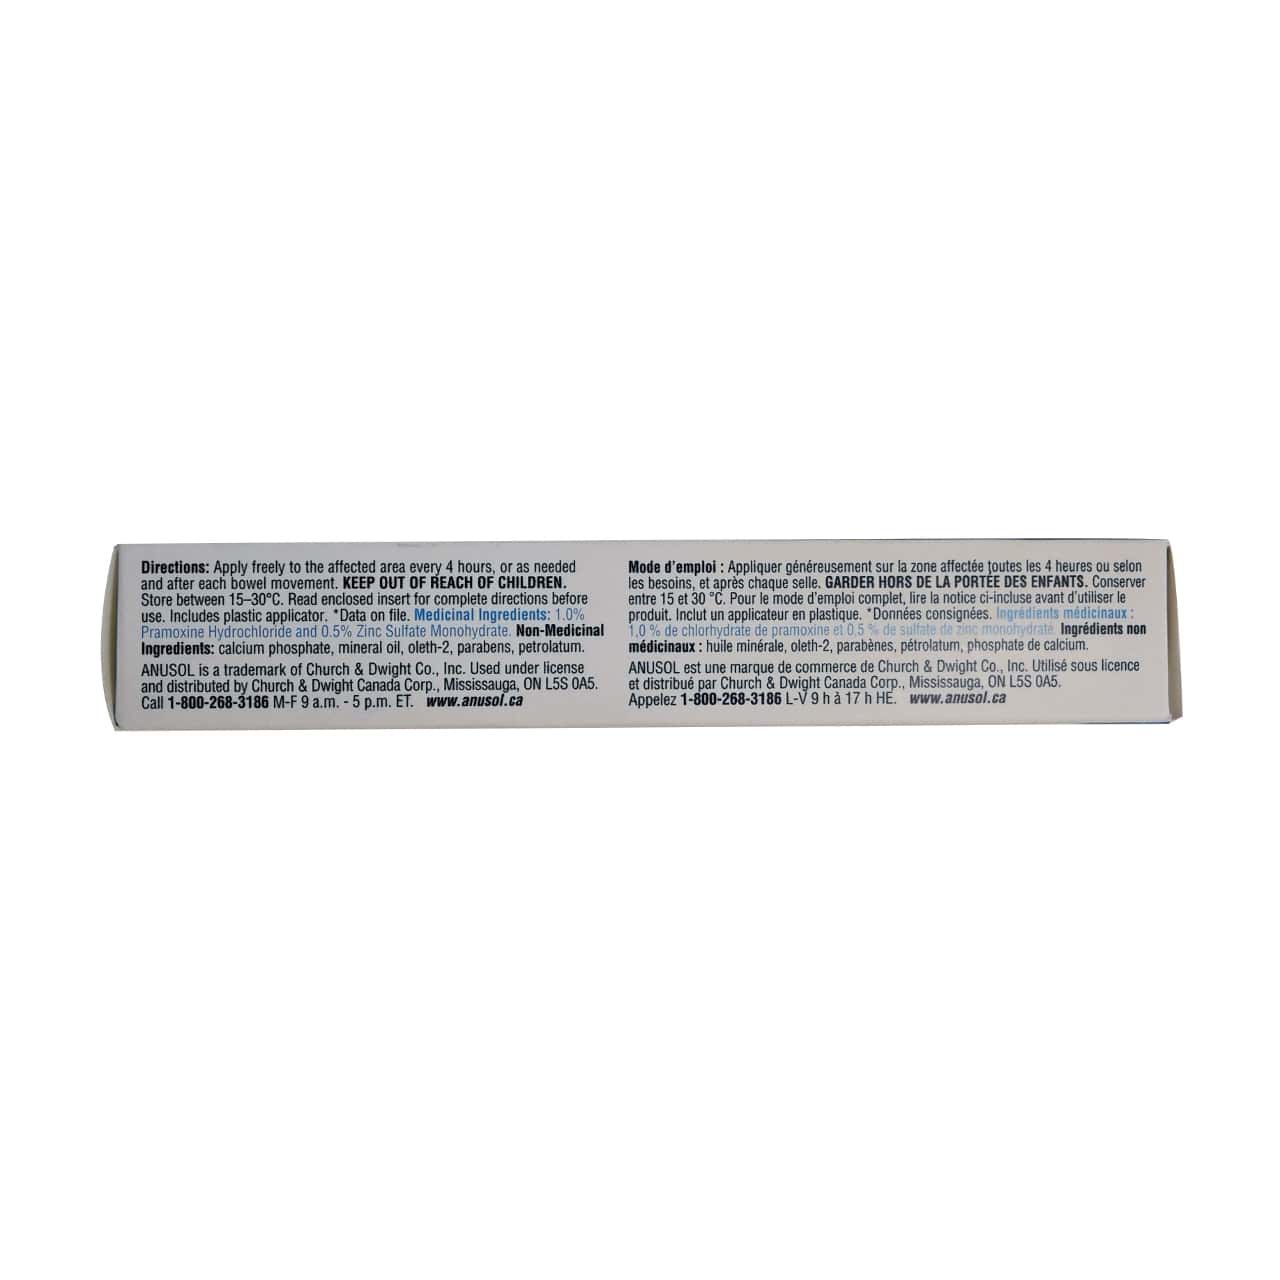 Product details, directions, ingredients, and warnings for Anusol Plus Hemorrhoidal Ointment with Anesthetic in English and French